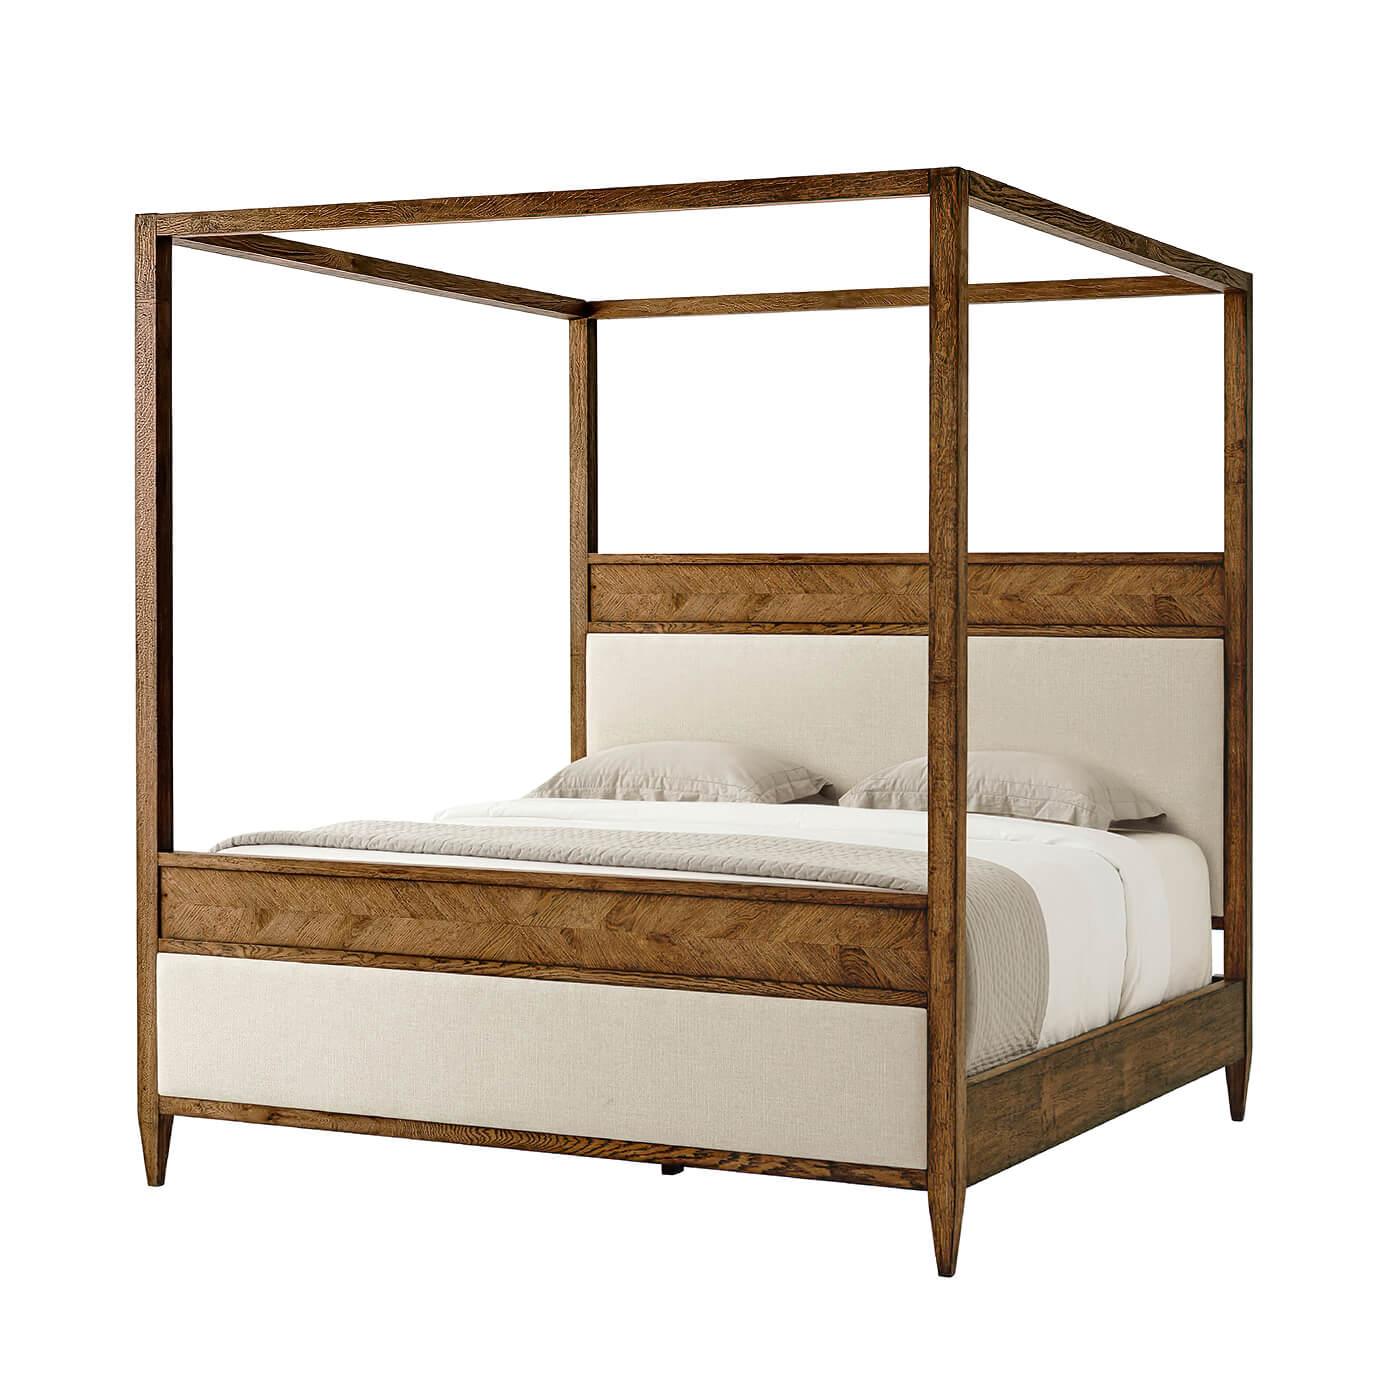 cal king bed dimensions